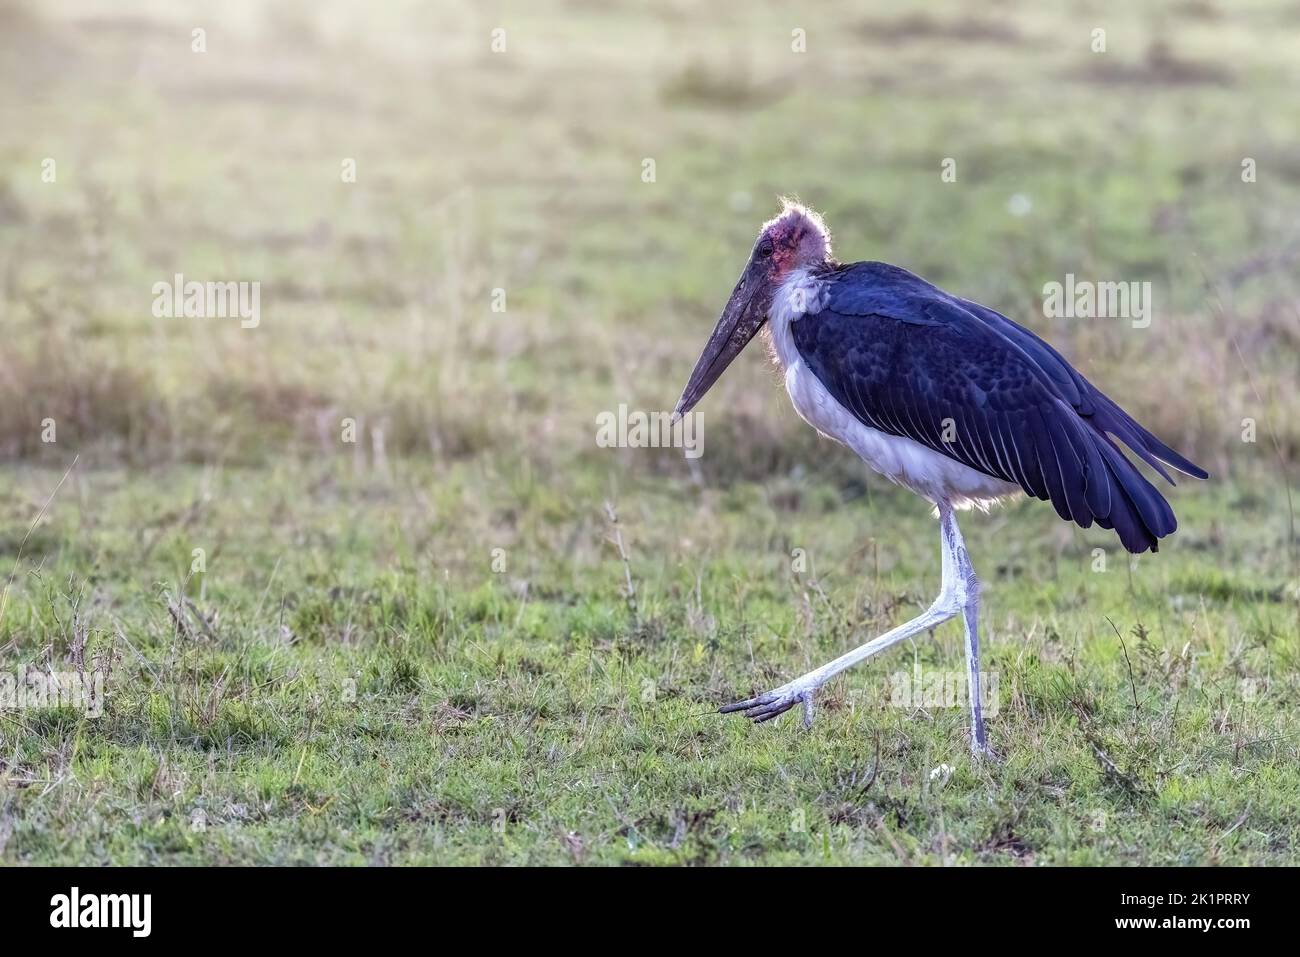 Side view of a marabou stork, Leptoptilos crumeniferus, known as an undertaker bird, in the Masai Mara, Kenya. This large bird grows to 150cm and is a Stock Photo